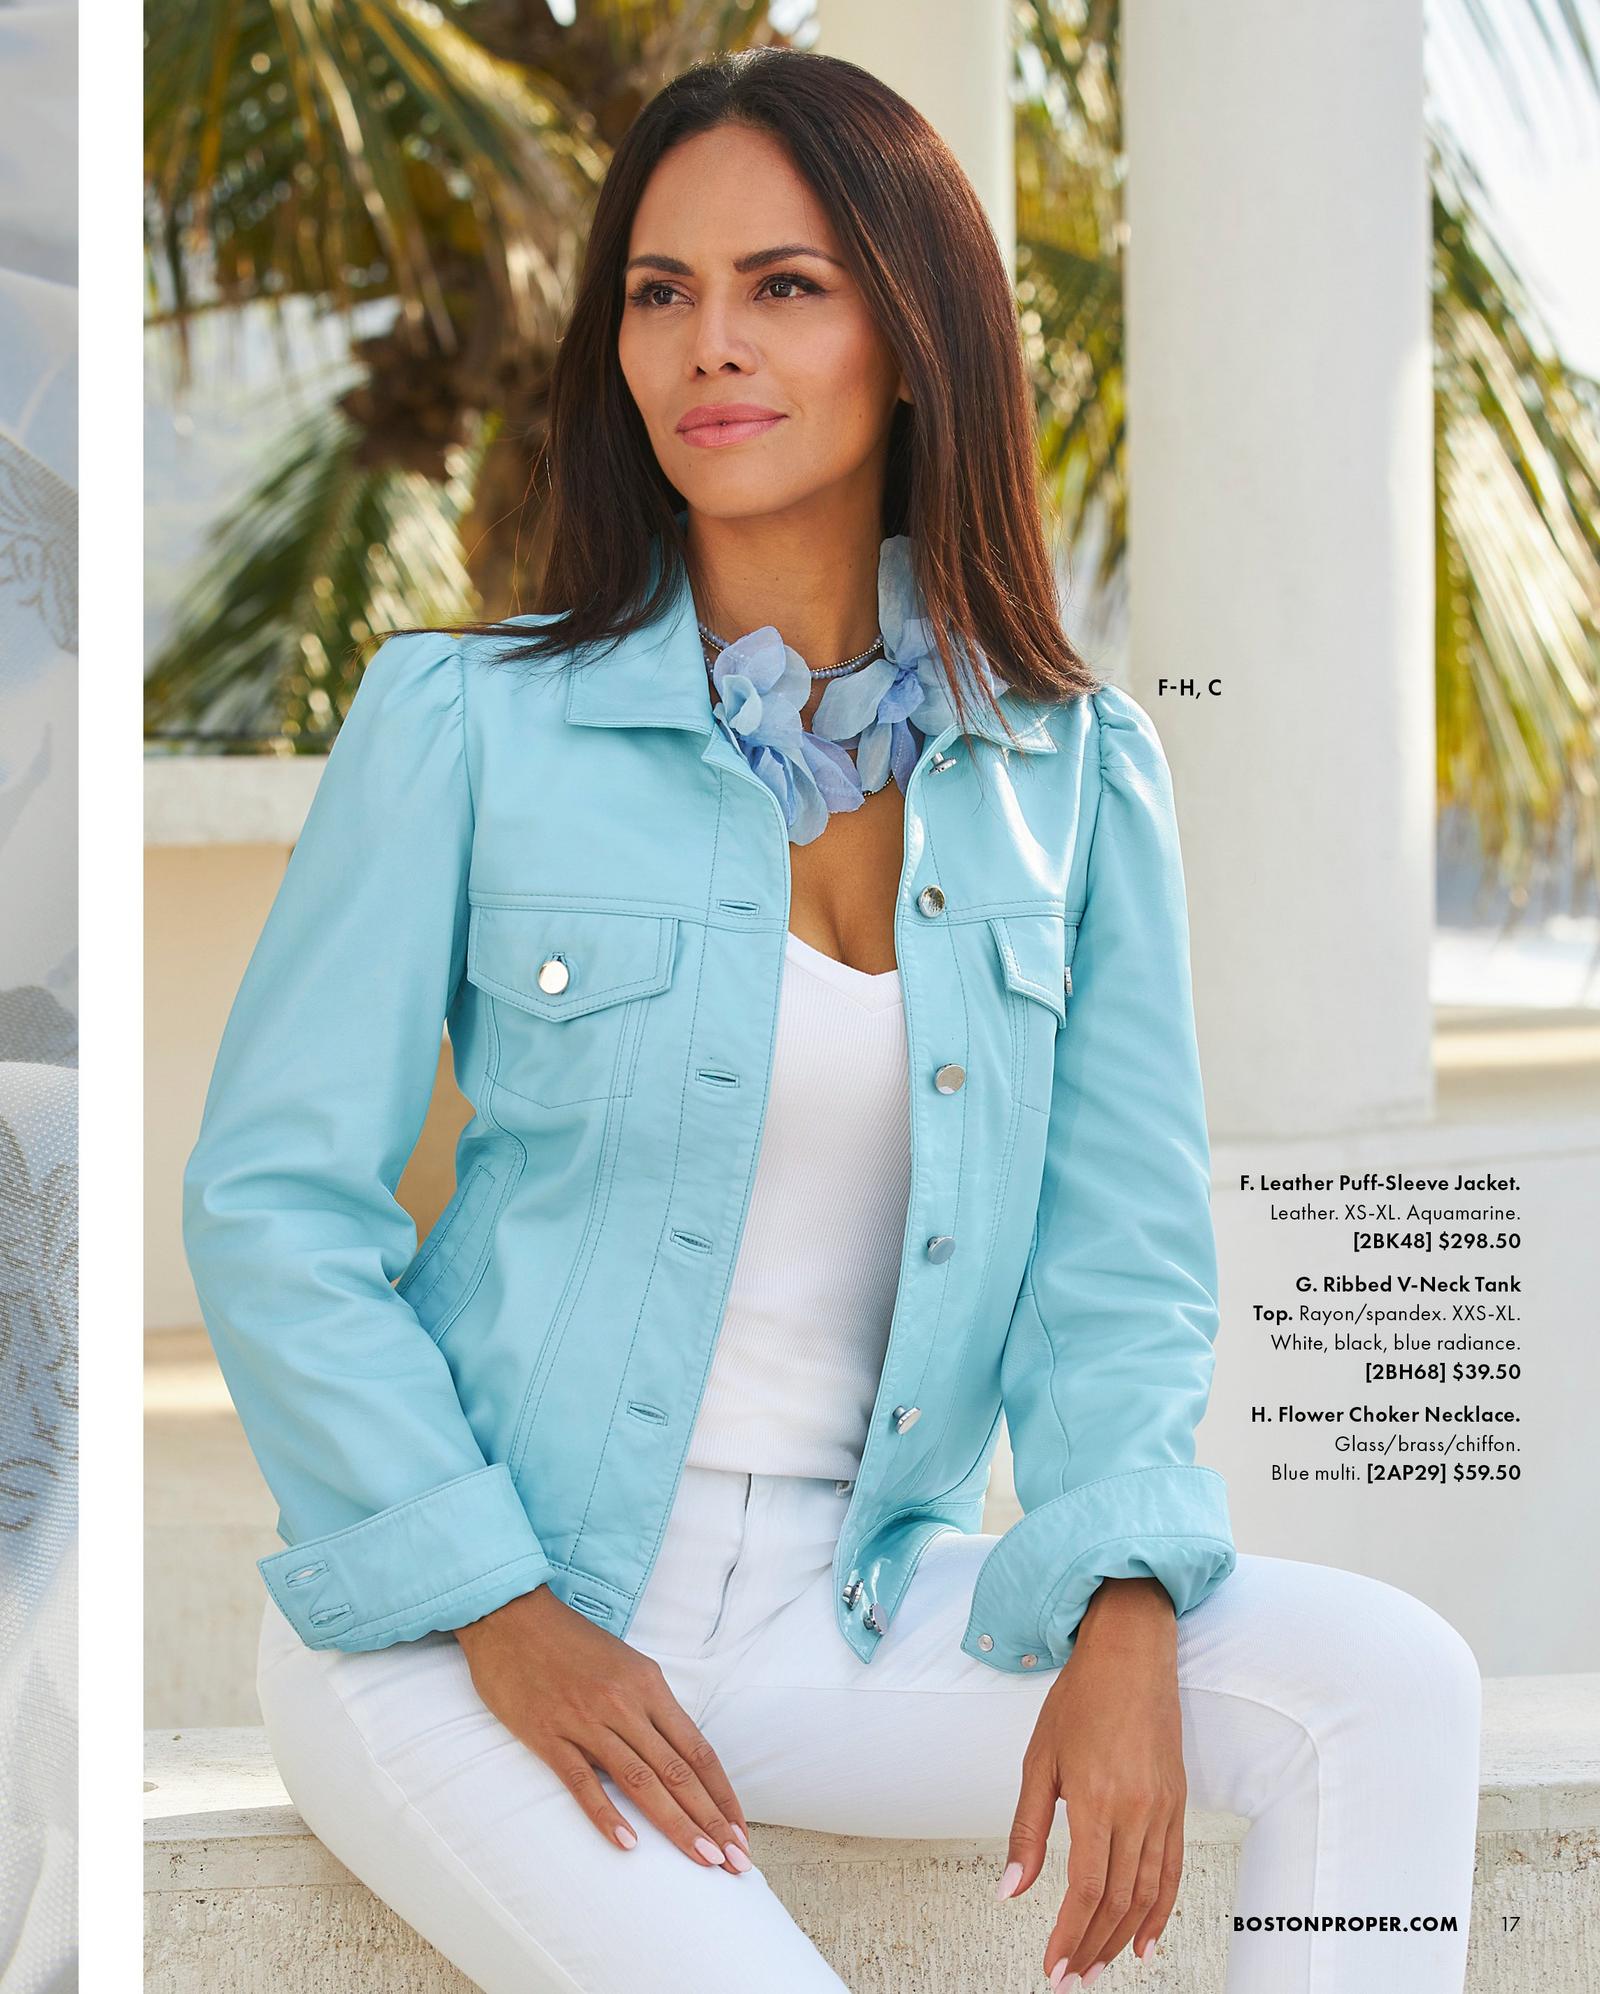 model wearing a light blue leather puff-sleeve jacket, white v-neck tank top, white jeans, and a blue flower choker necklace.